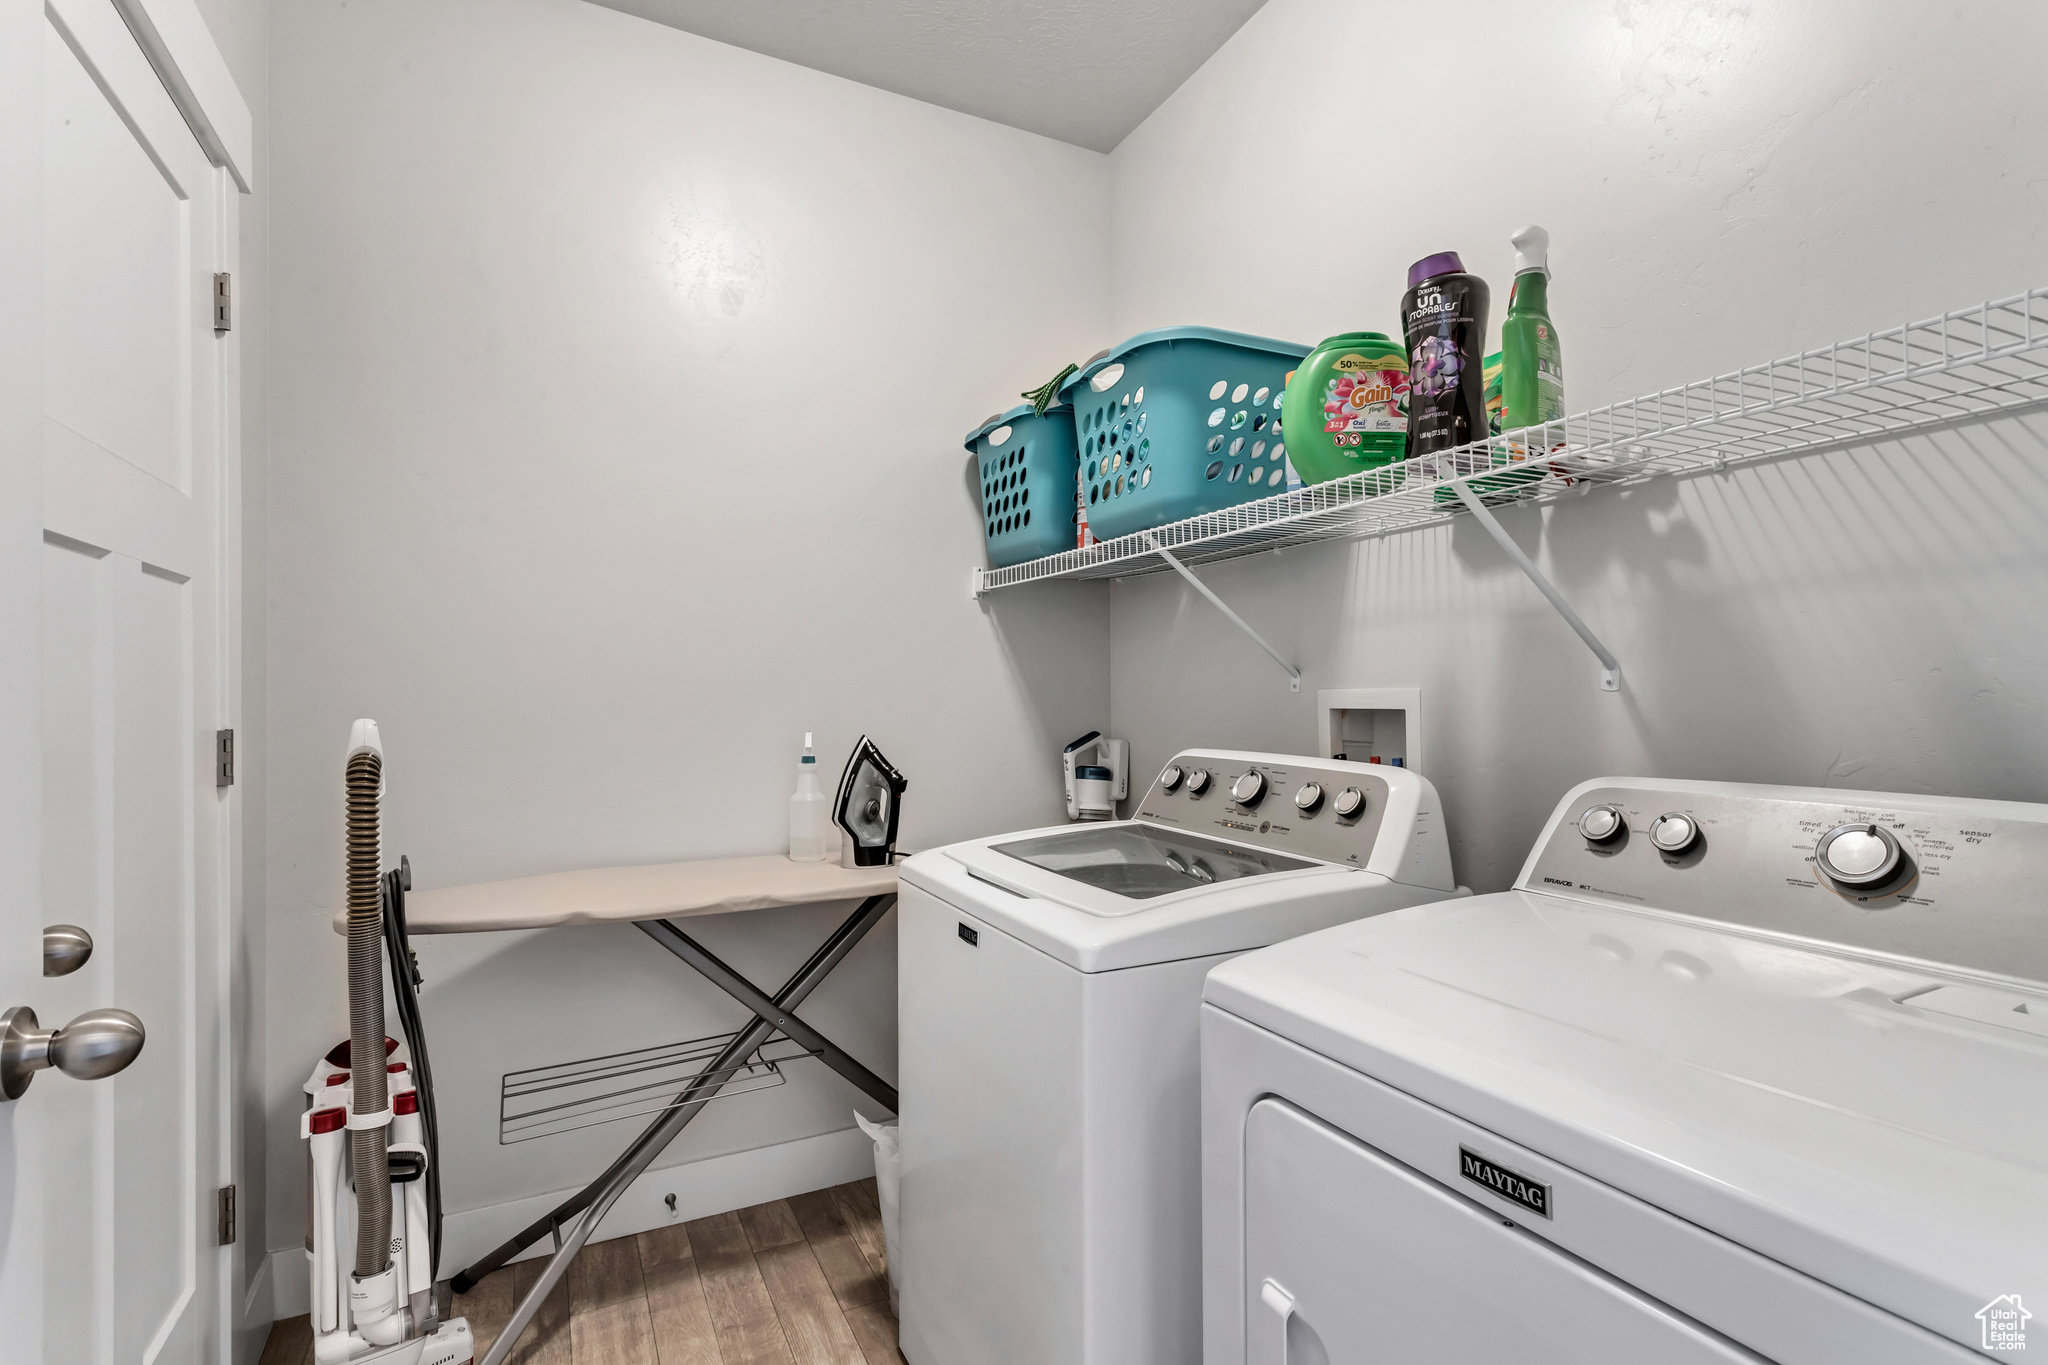 Clothes washing area with independent washer and dryer, hookup for a washing machine, and hardwood / wood-style flooring